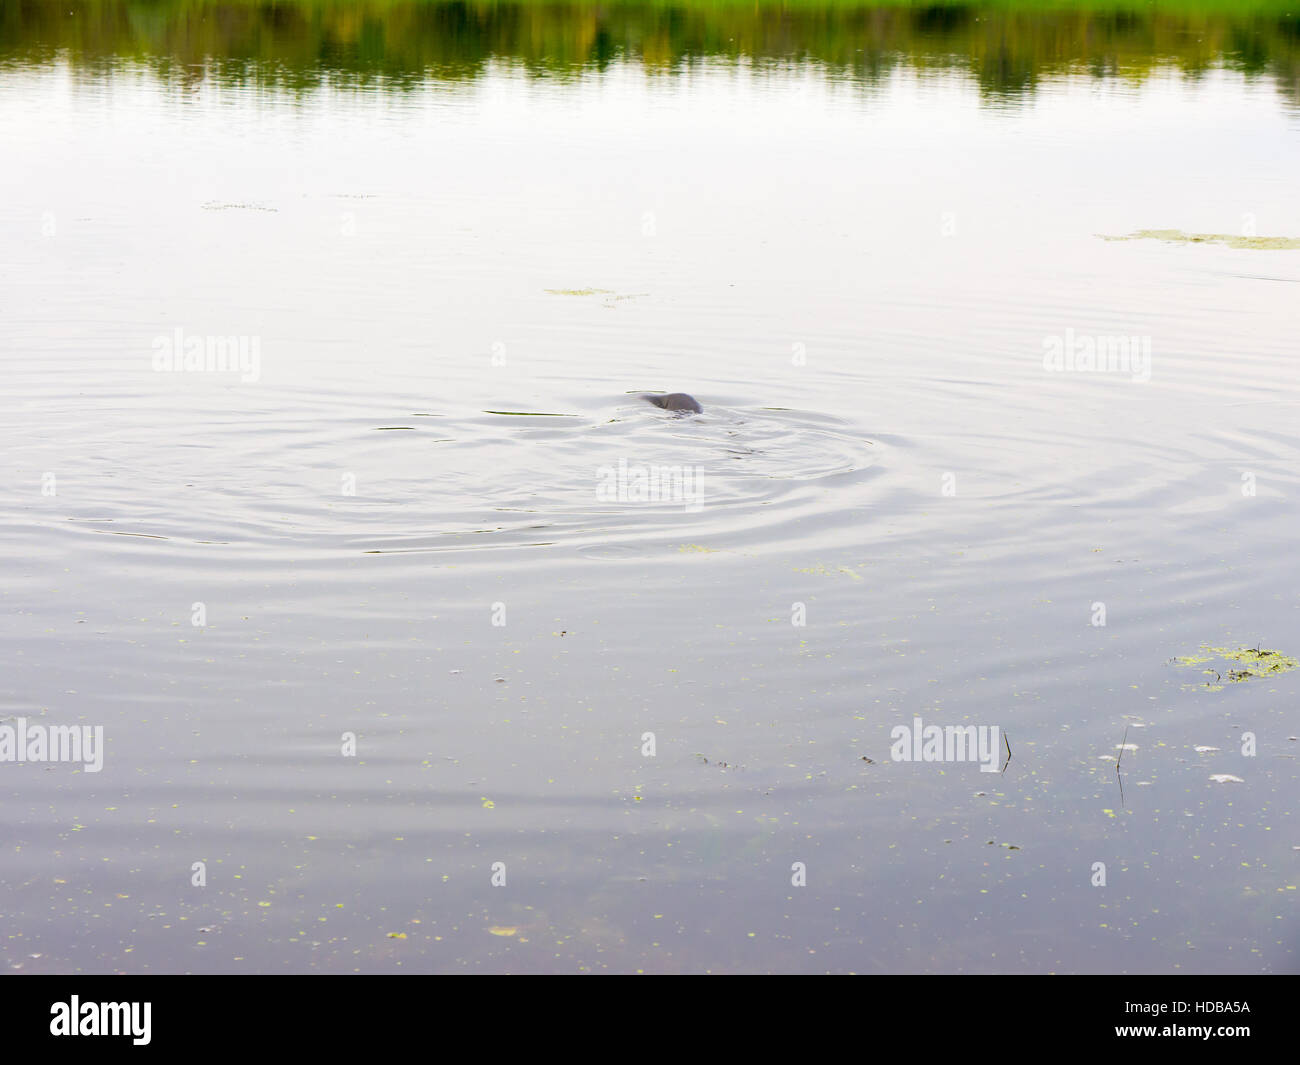 Floating fish on the surface of the river. Stock Photo